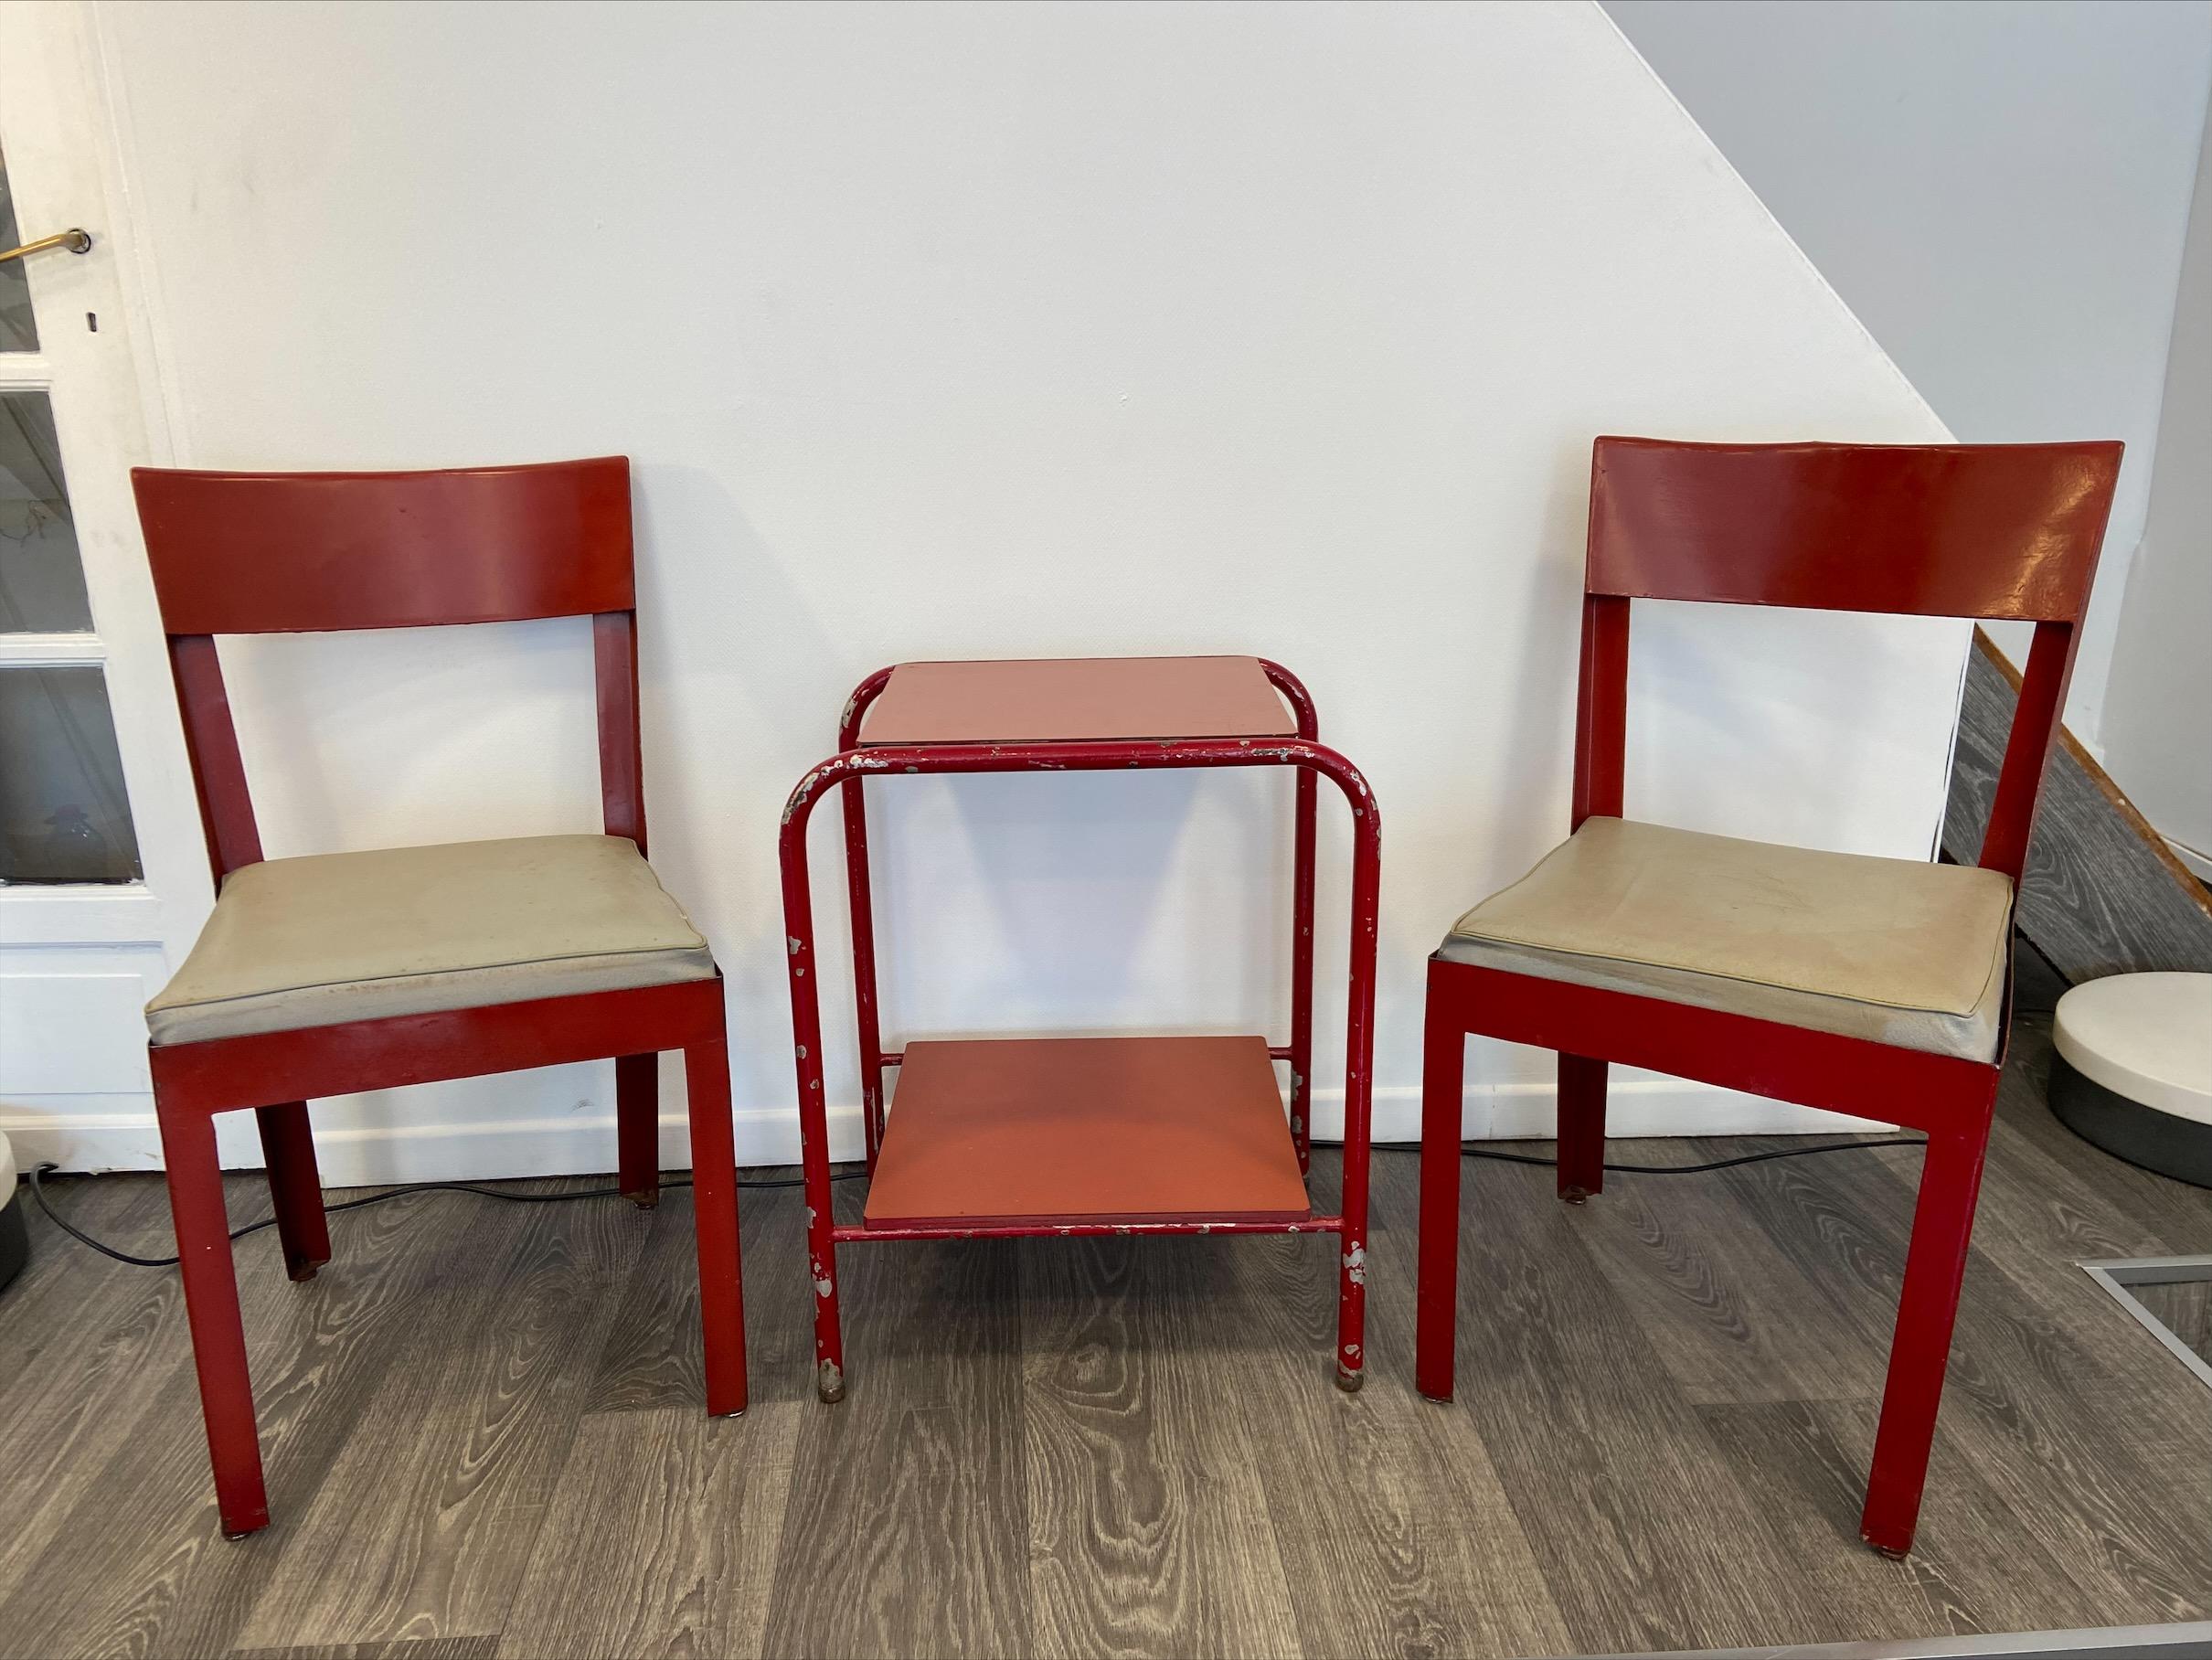 Set of 2 chairs and 1 pedestal table - Jean Prouvé
For the Martel-de-Janville Sanatorium
Circa 1935
Chair: H82xW42xD45cm
Side table: H62xW50xD39cm
Lacquered metal and original leatherette
This is a set intended for a bedroom, a set of which is